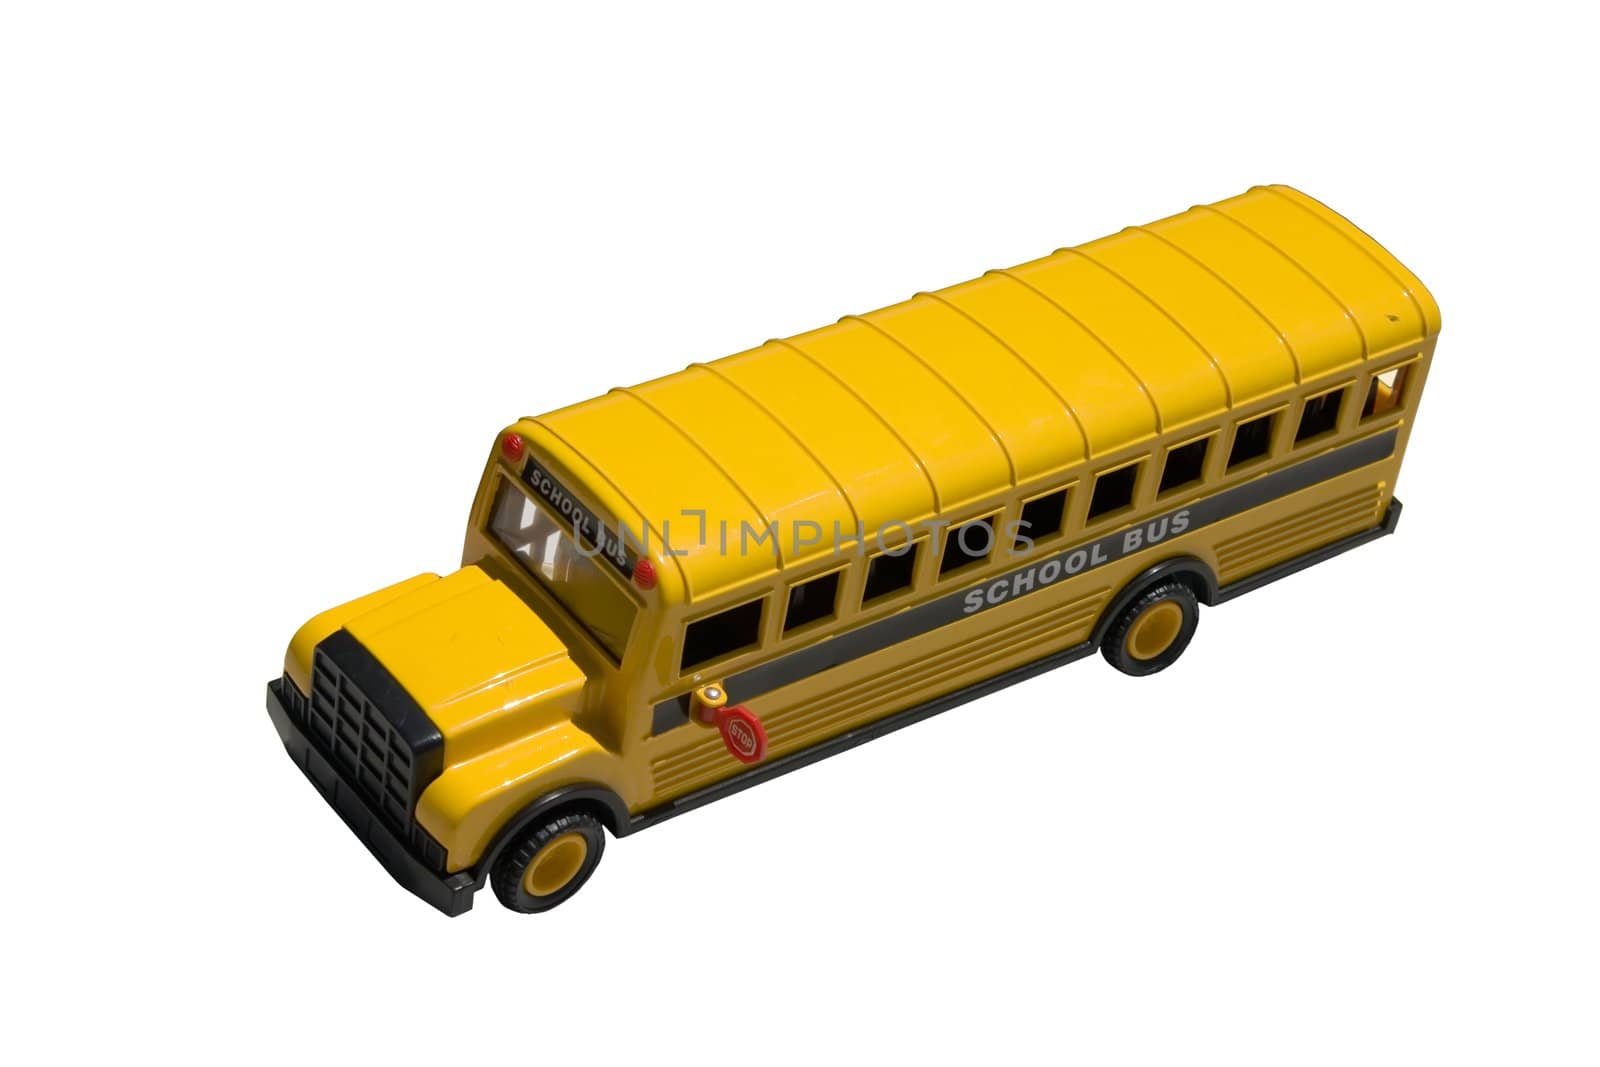 This is a picture of the top of a toy school bus isolated on white.